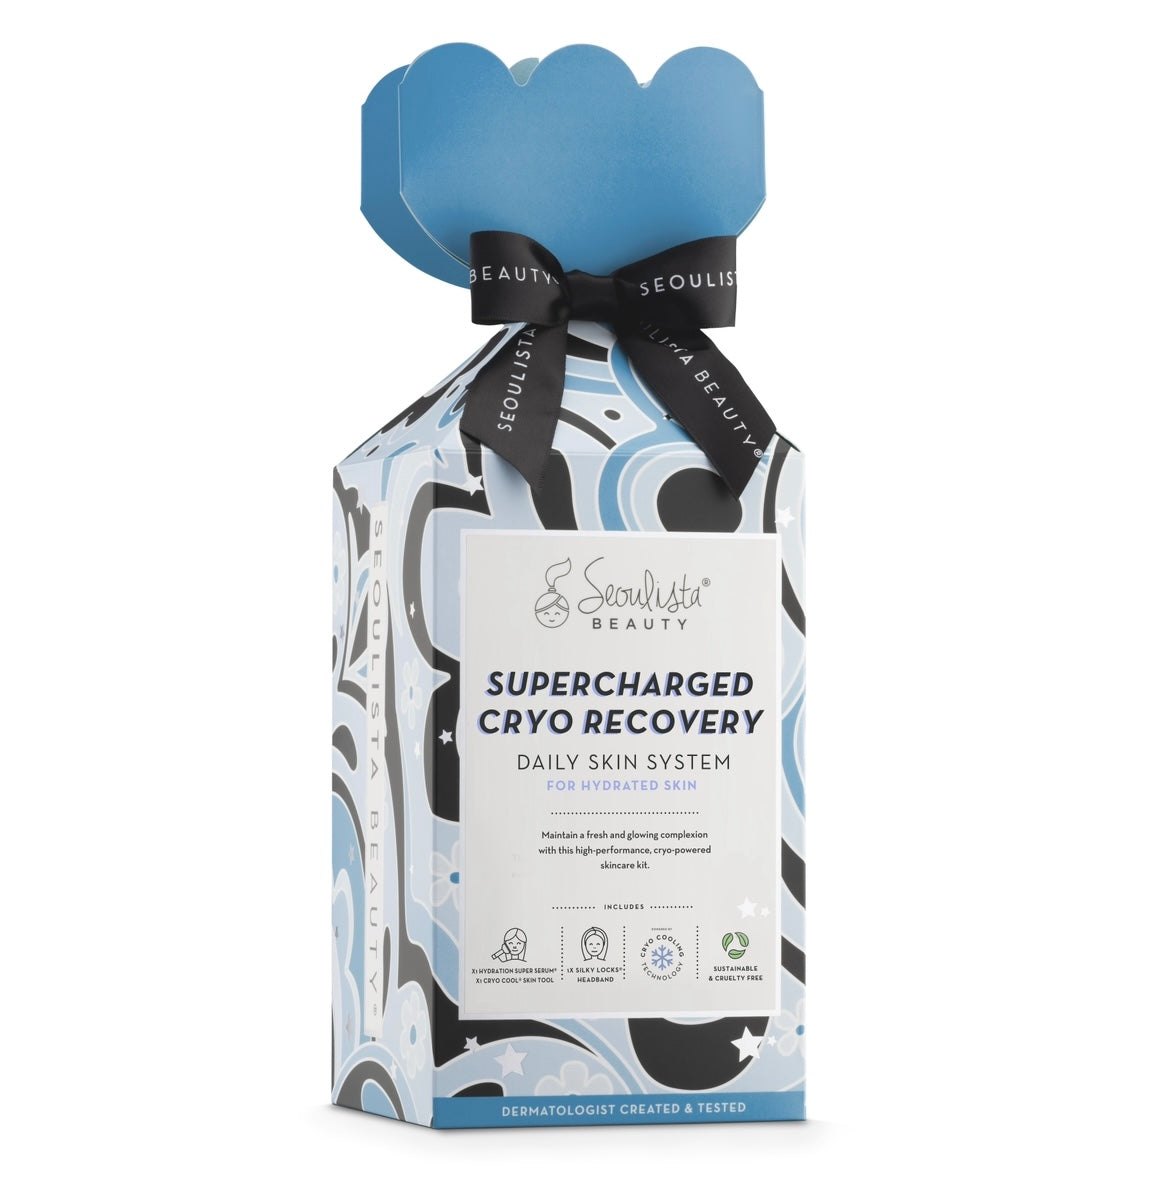 Seoulista Beauty Supercharged Cryo Recovery Daily Skin System